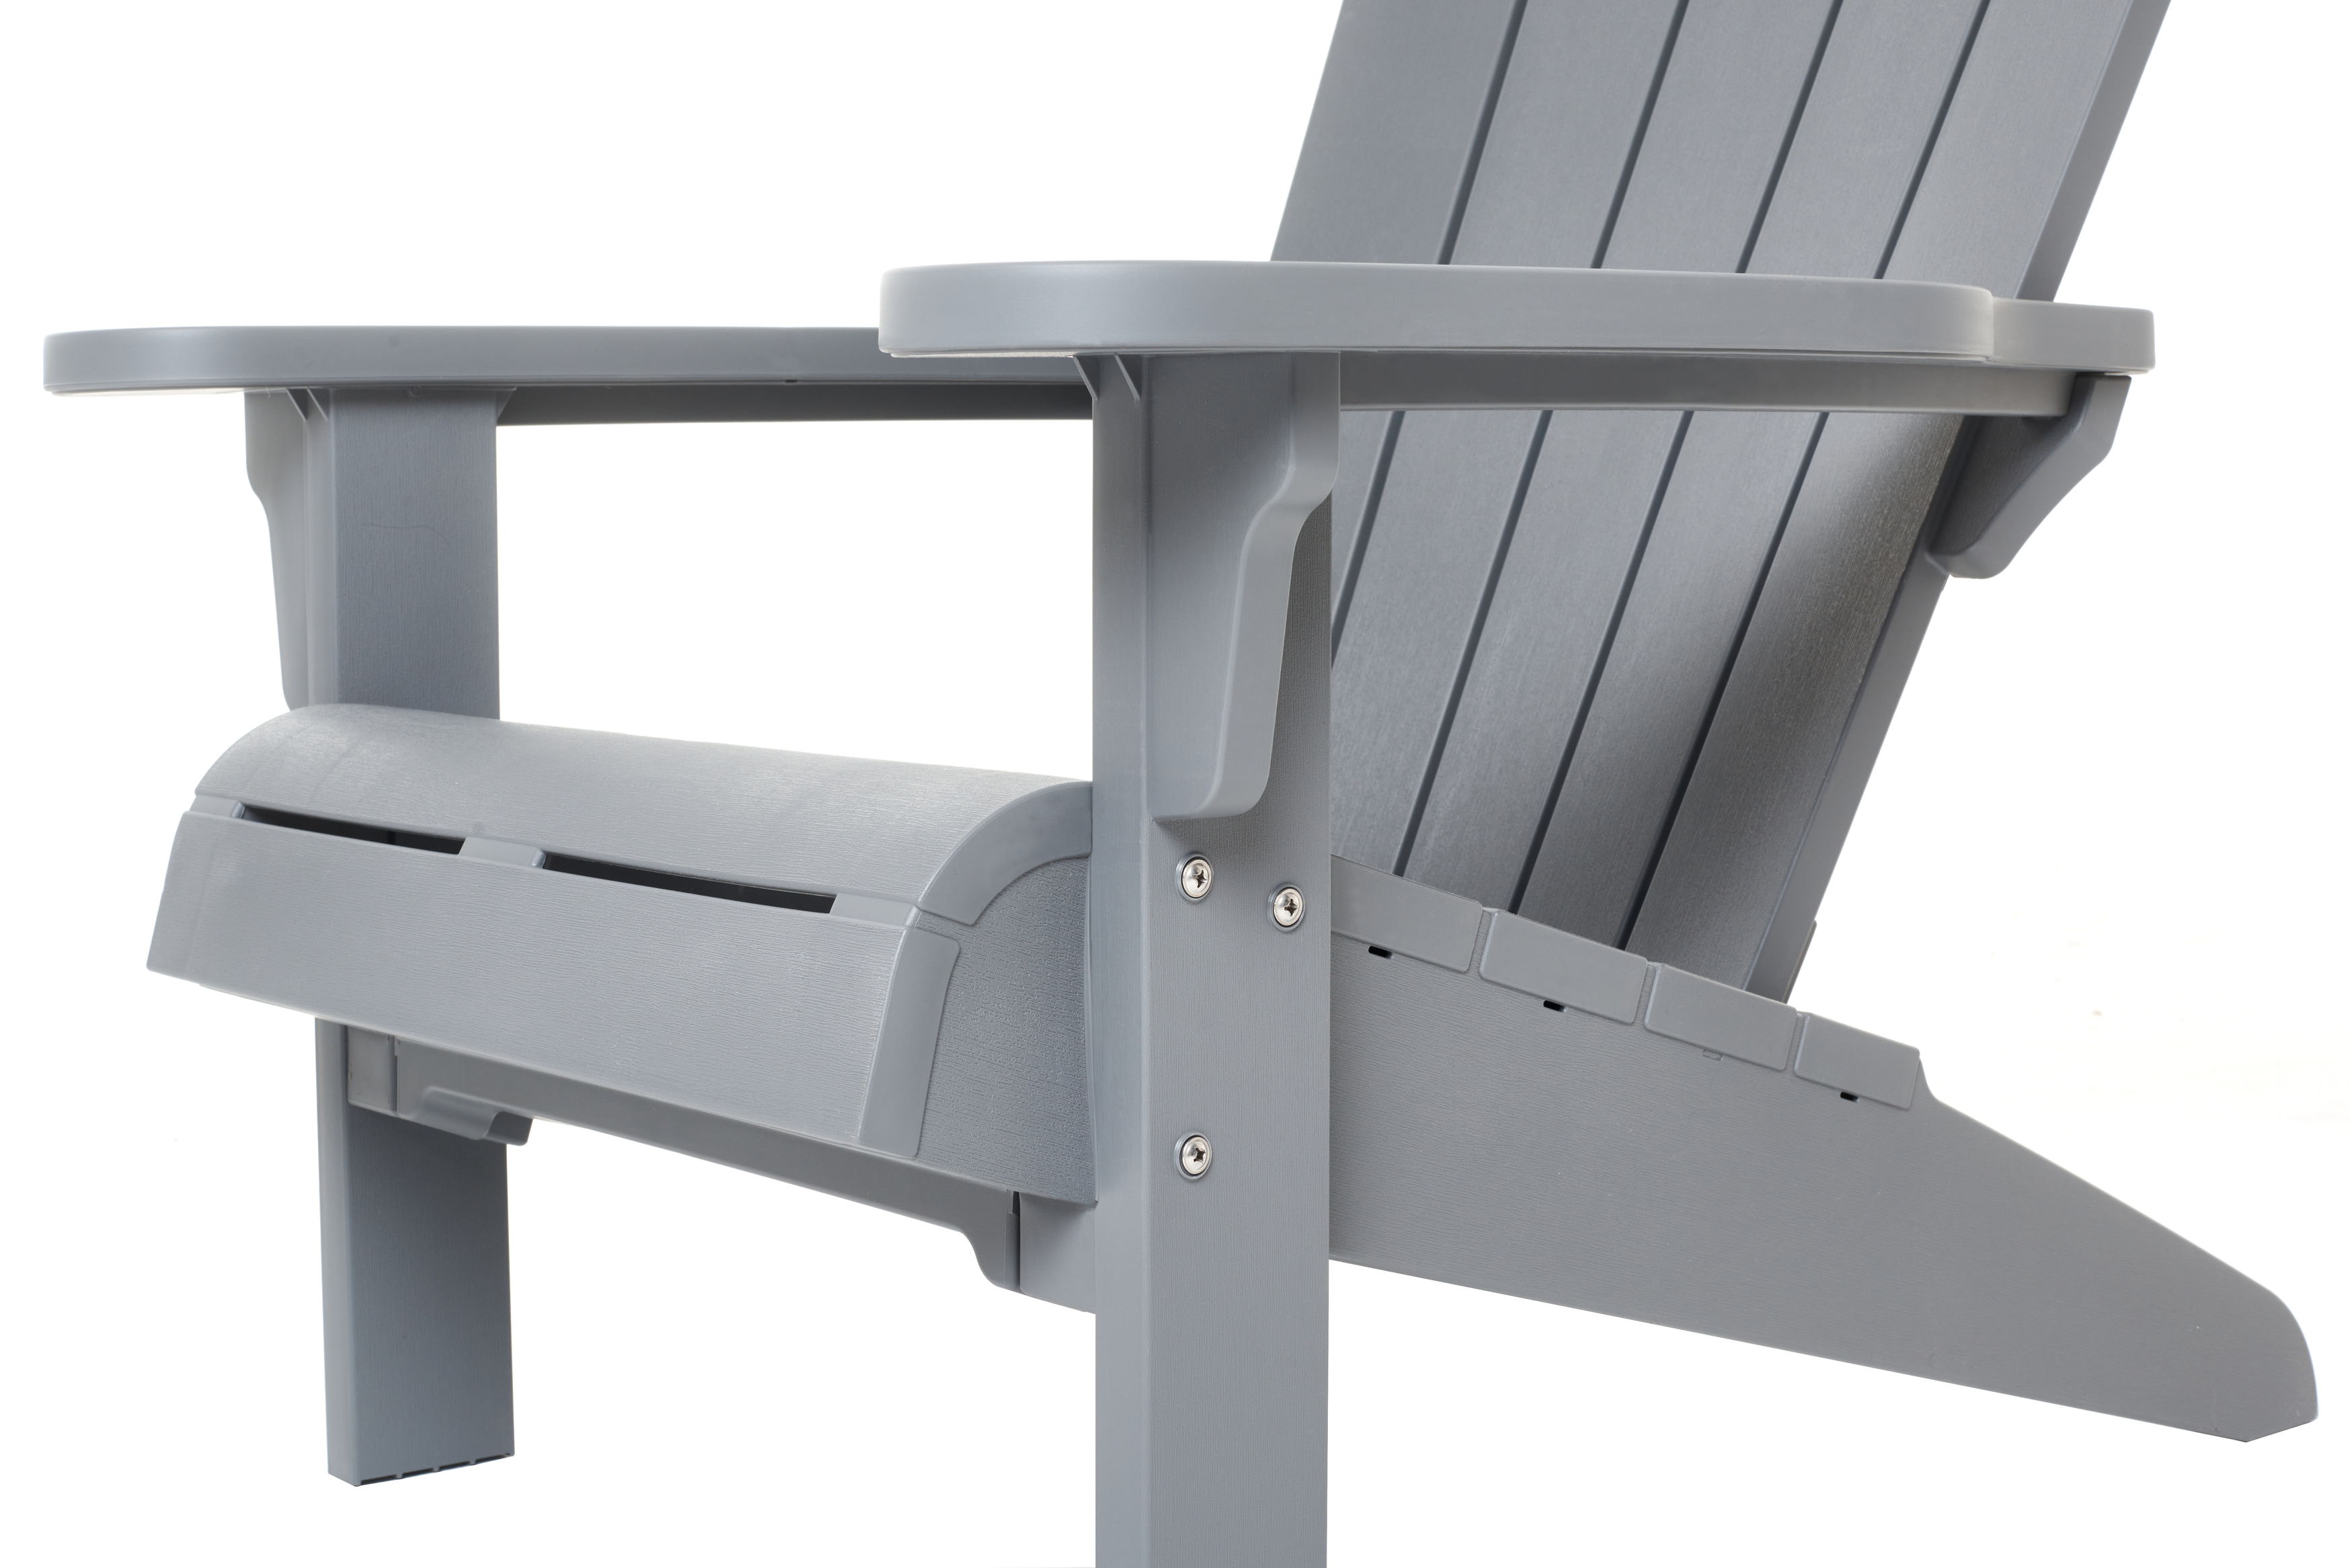 Keter Adirondack Chair, Resin Outdoor Furniture, Gray - image 2 of 7